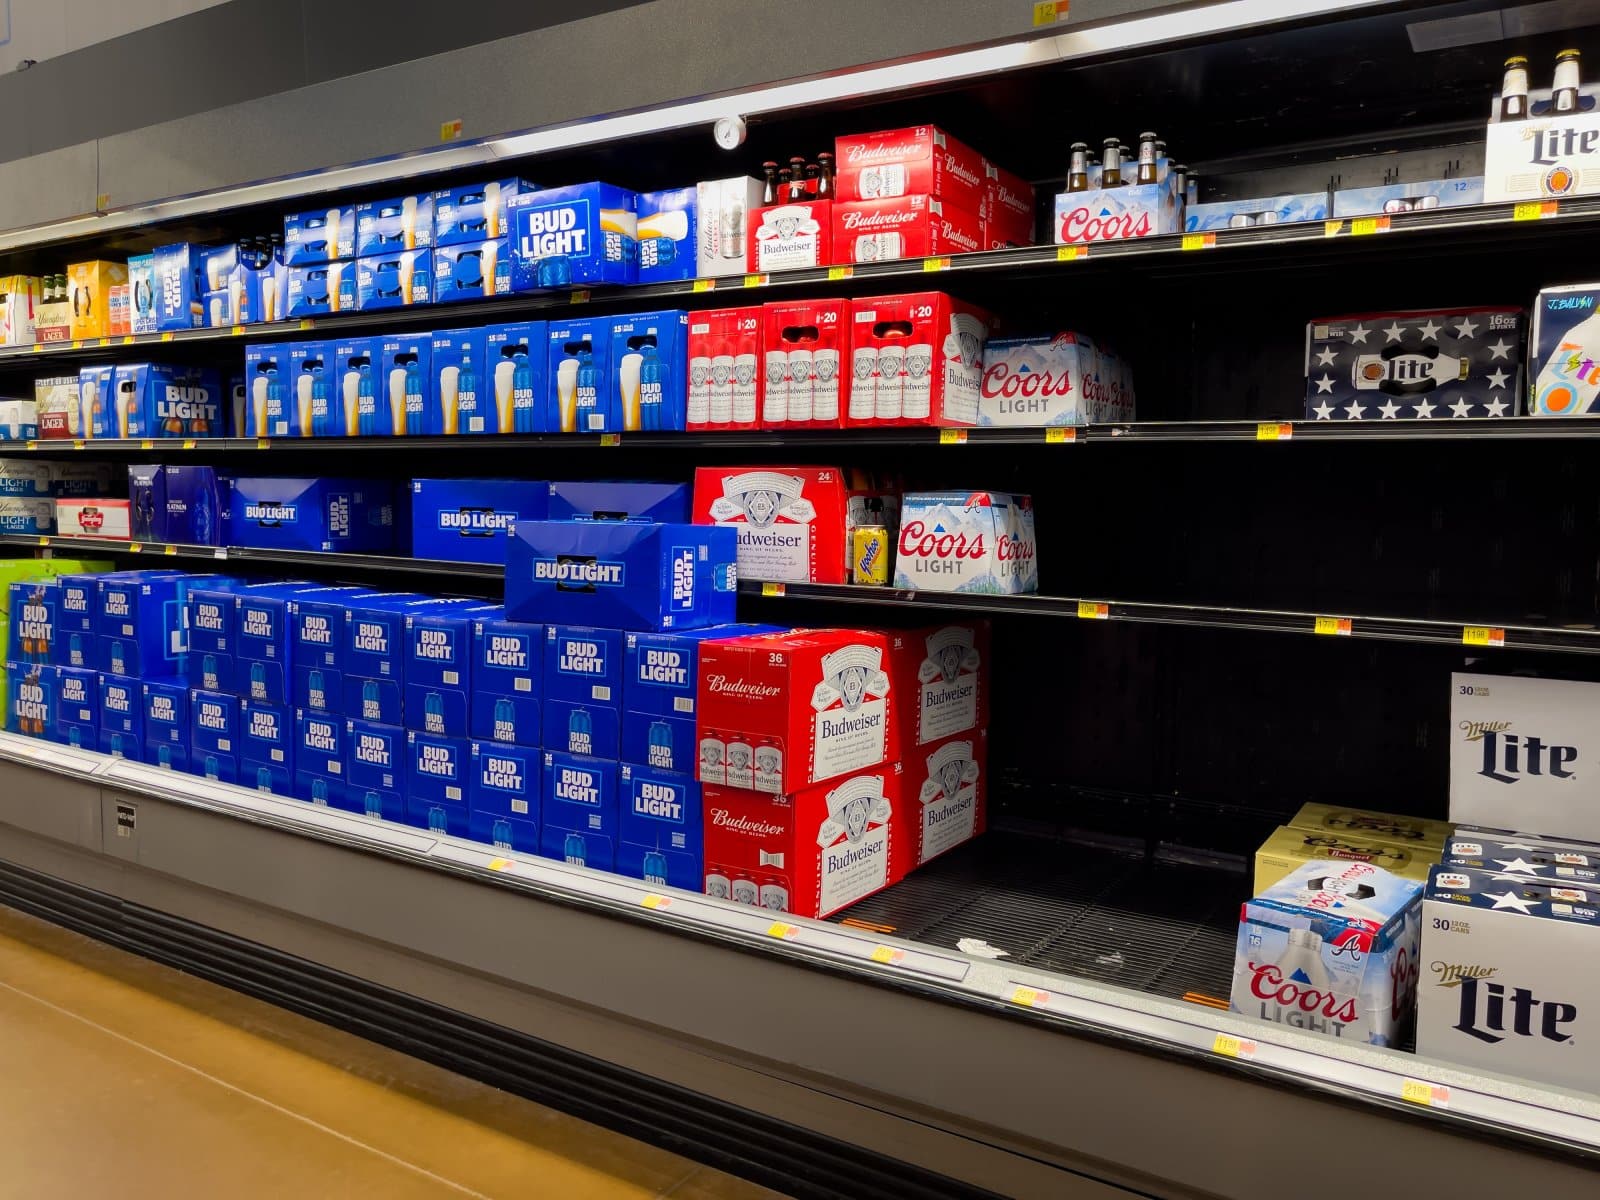 <p><span>Just weeks after the fallout, Bud Light lost its position as the fastest-selling beer in the U.S., replaced by Modelo. </span></p>